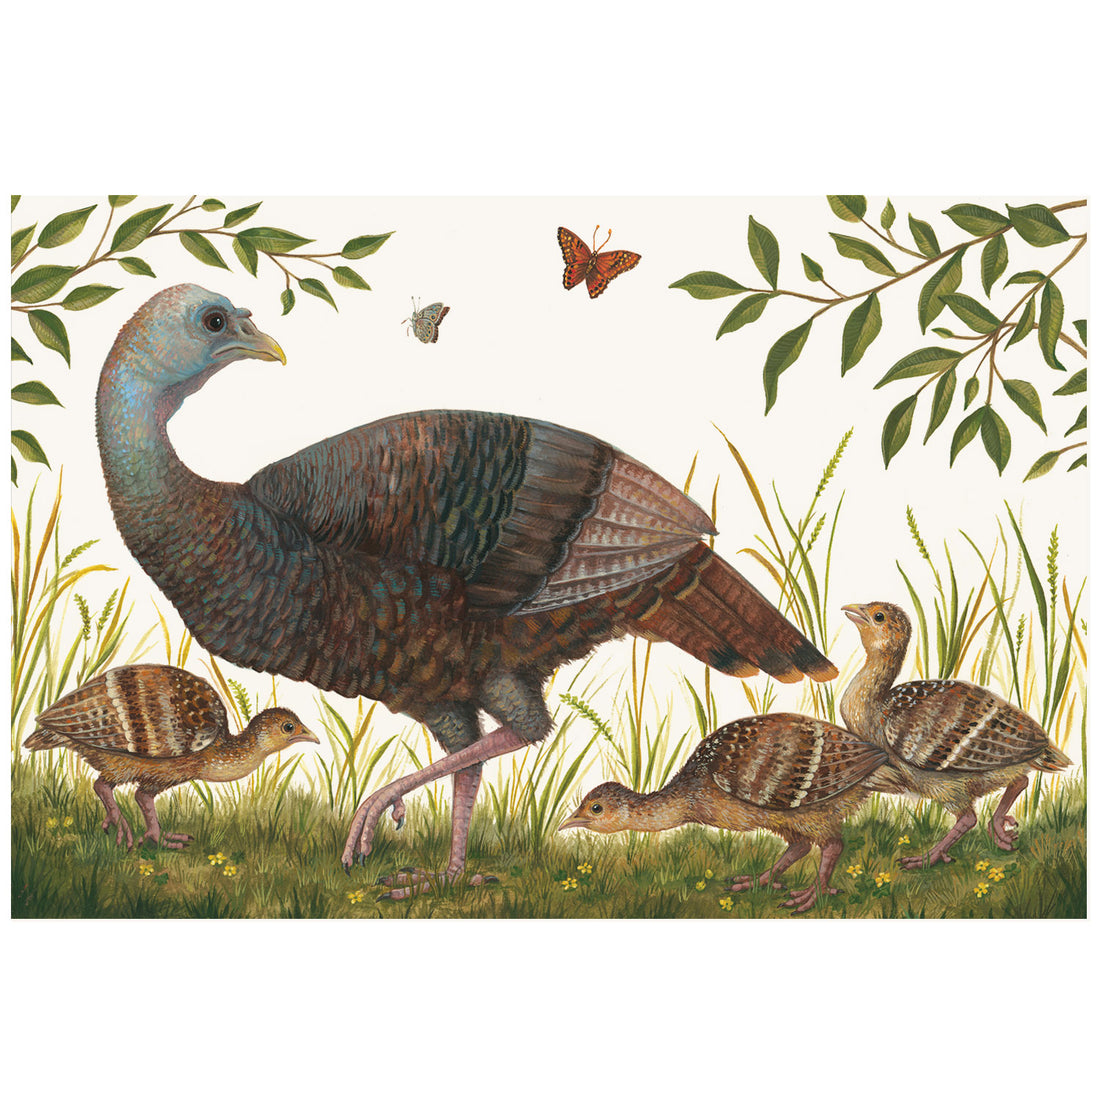 A realistic illustration of a brown and blue female turkey and her three brown, speckled chicks, standing in green grass surrounded by leafy branches and two butterflies, on a white background.